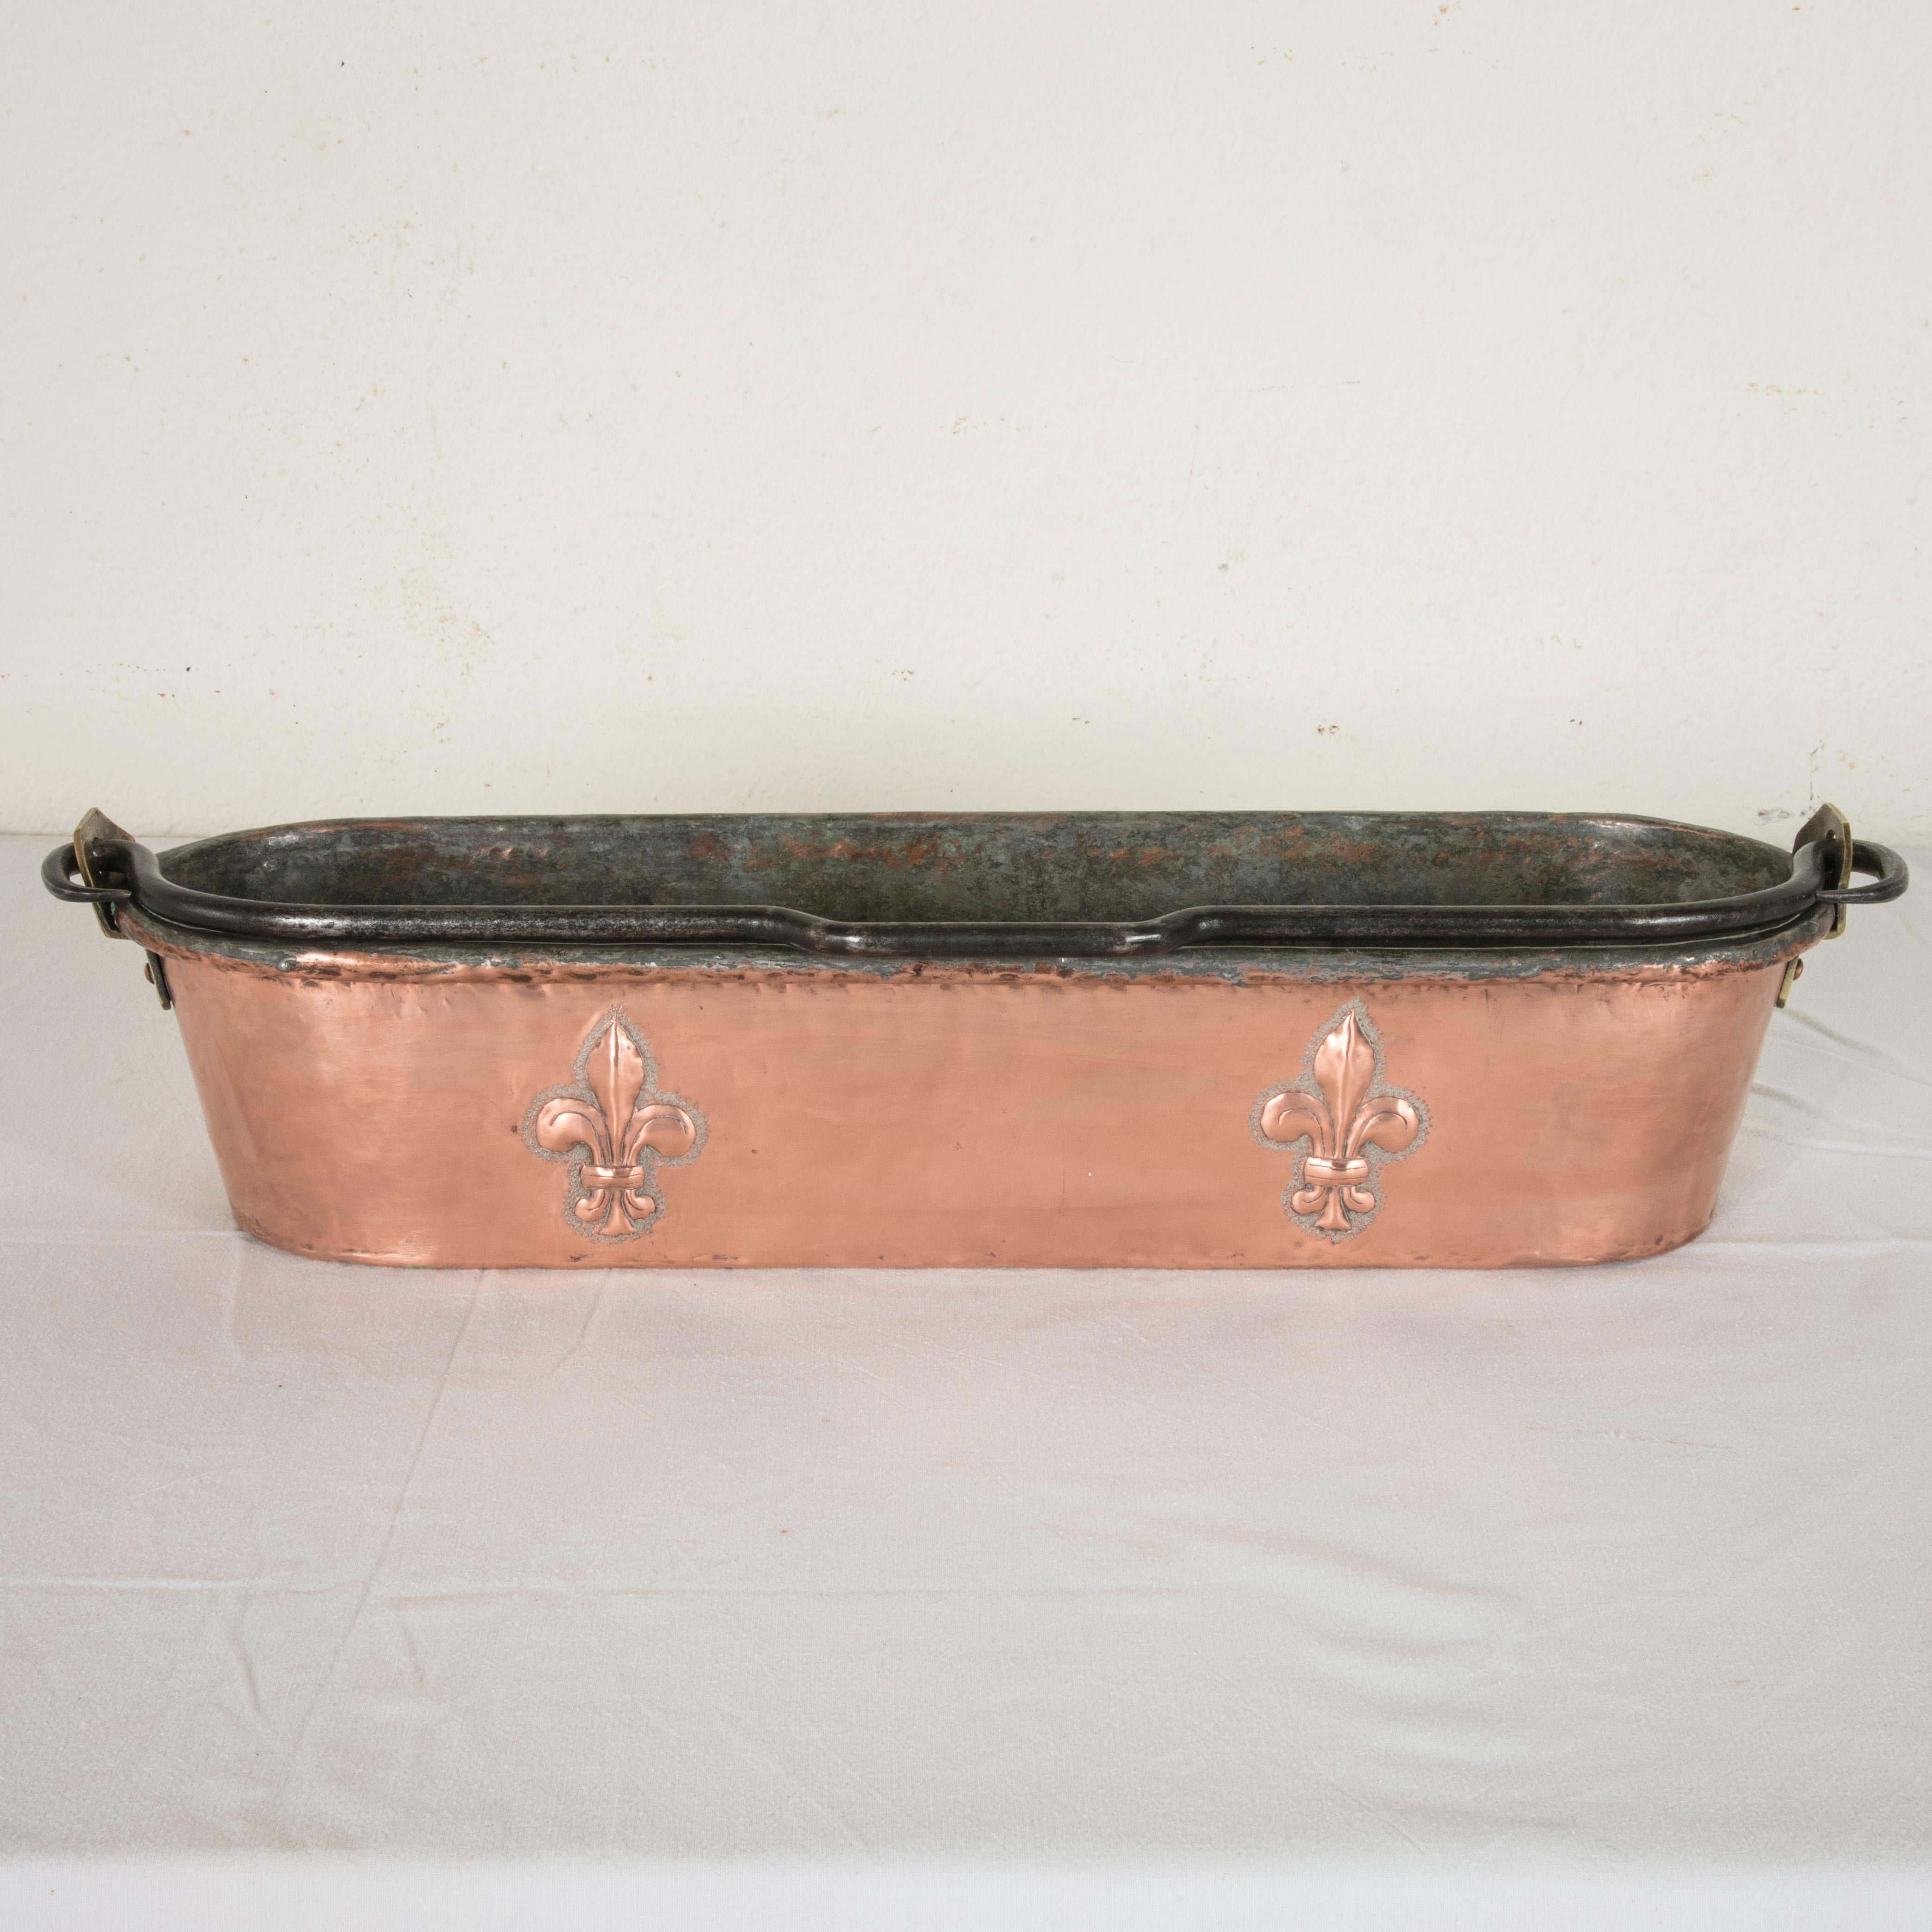 Originally used in a French chateau, this Louis Philippe period copper poissoniere or fish poacher from the 19th century features two repousse fleurs-de-lys on each side. An iron handle is held by copper riveted bronze plates. A beautiful